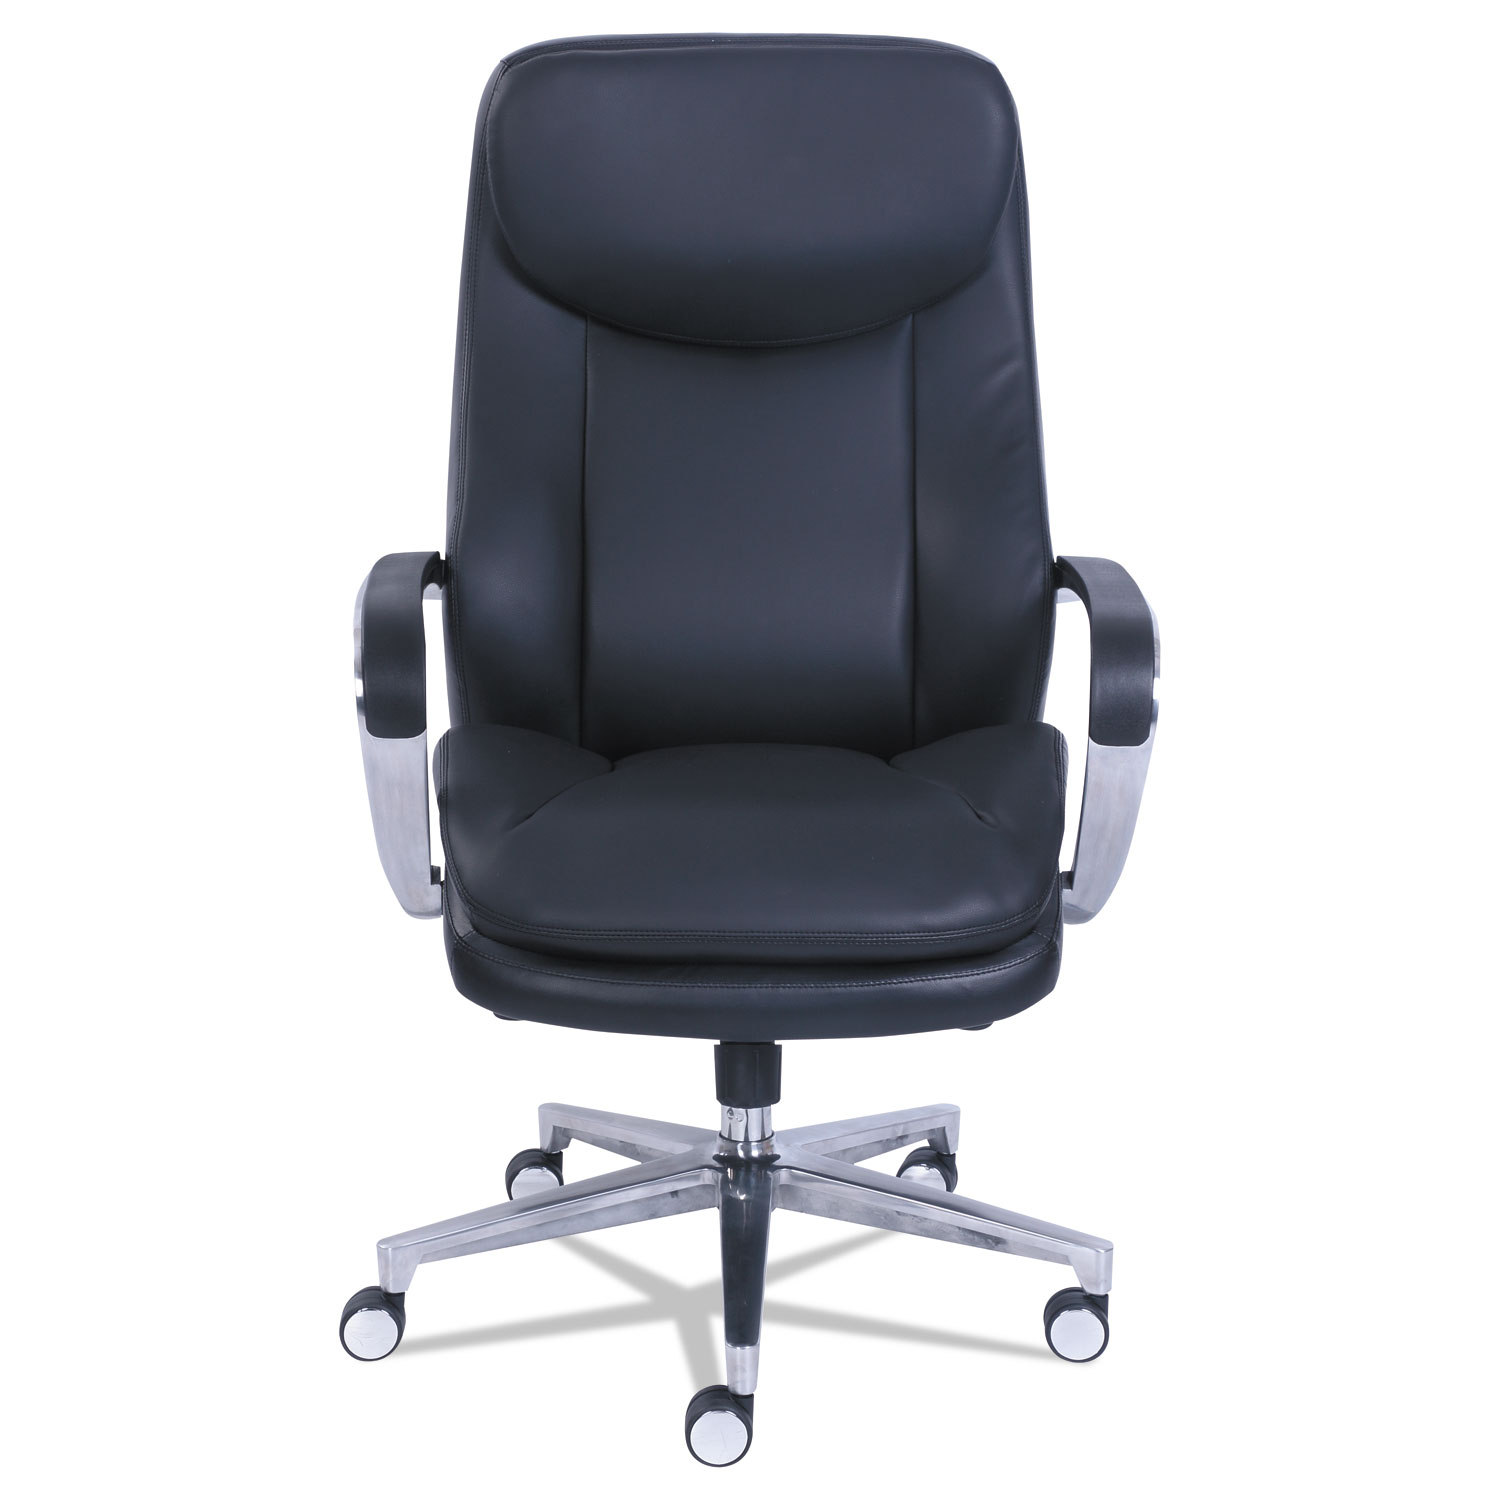 Commercial 2000 High-Back Executive Chair, Black